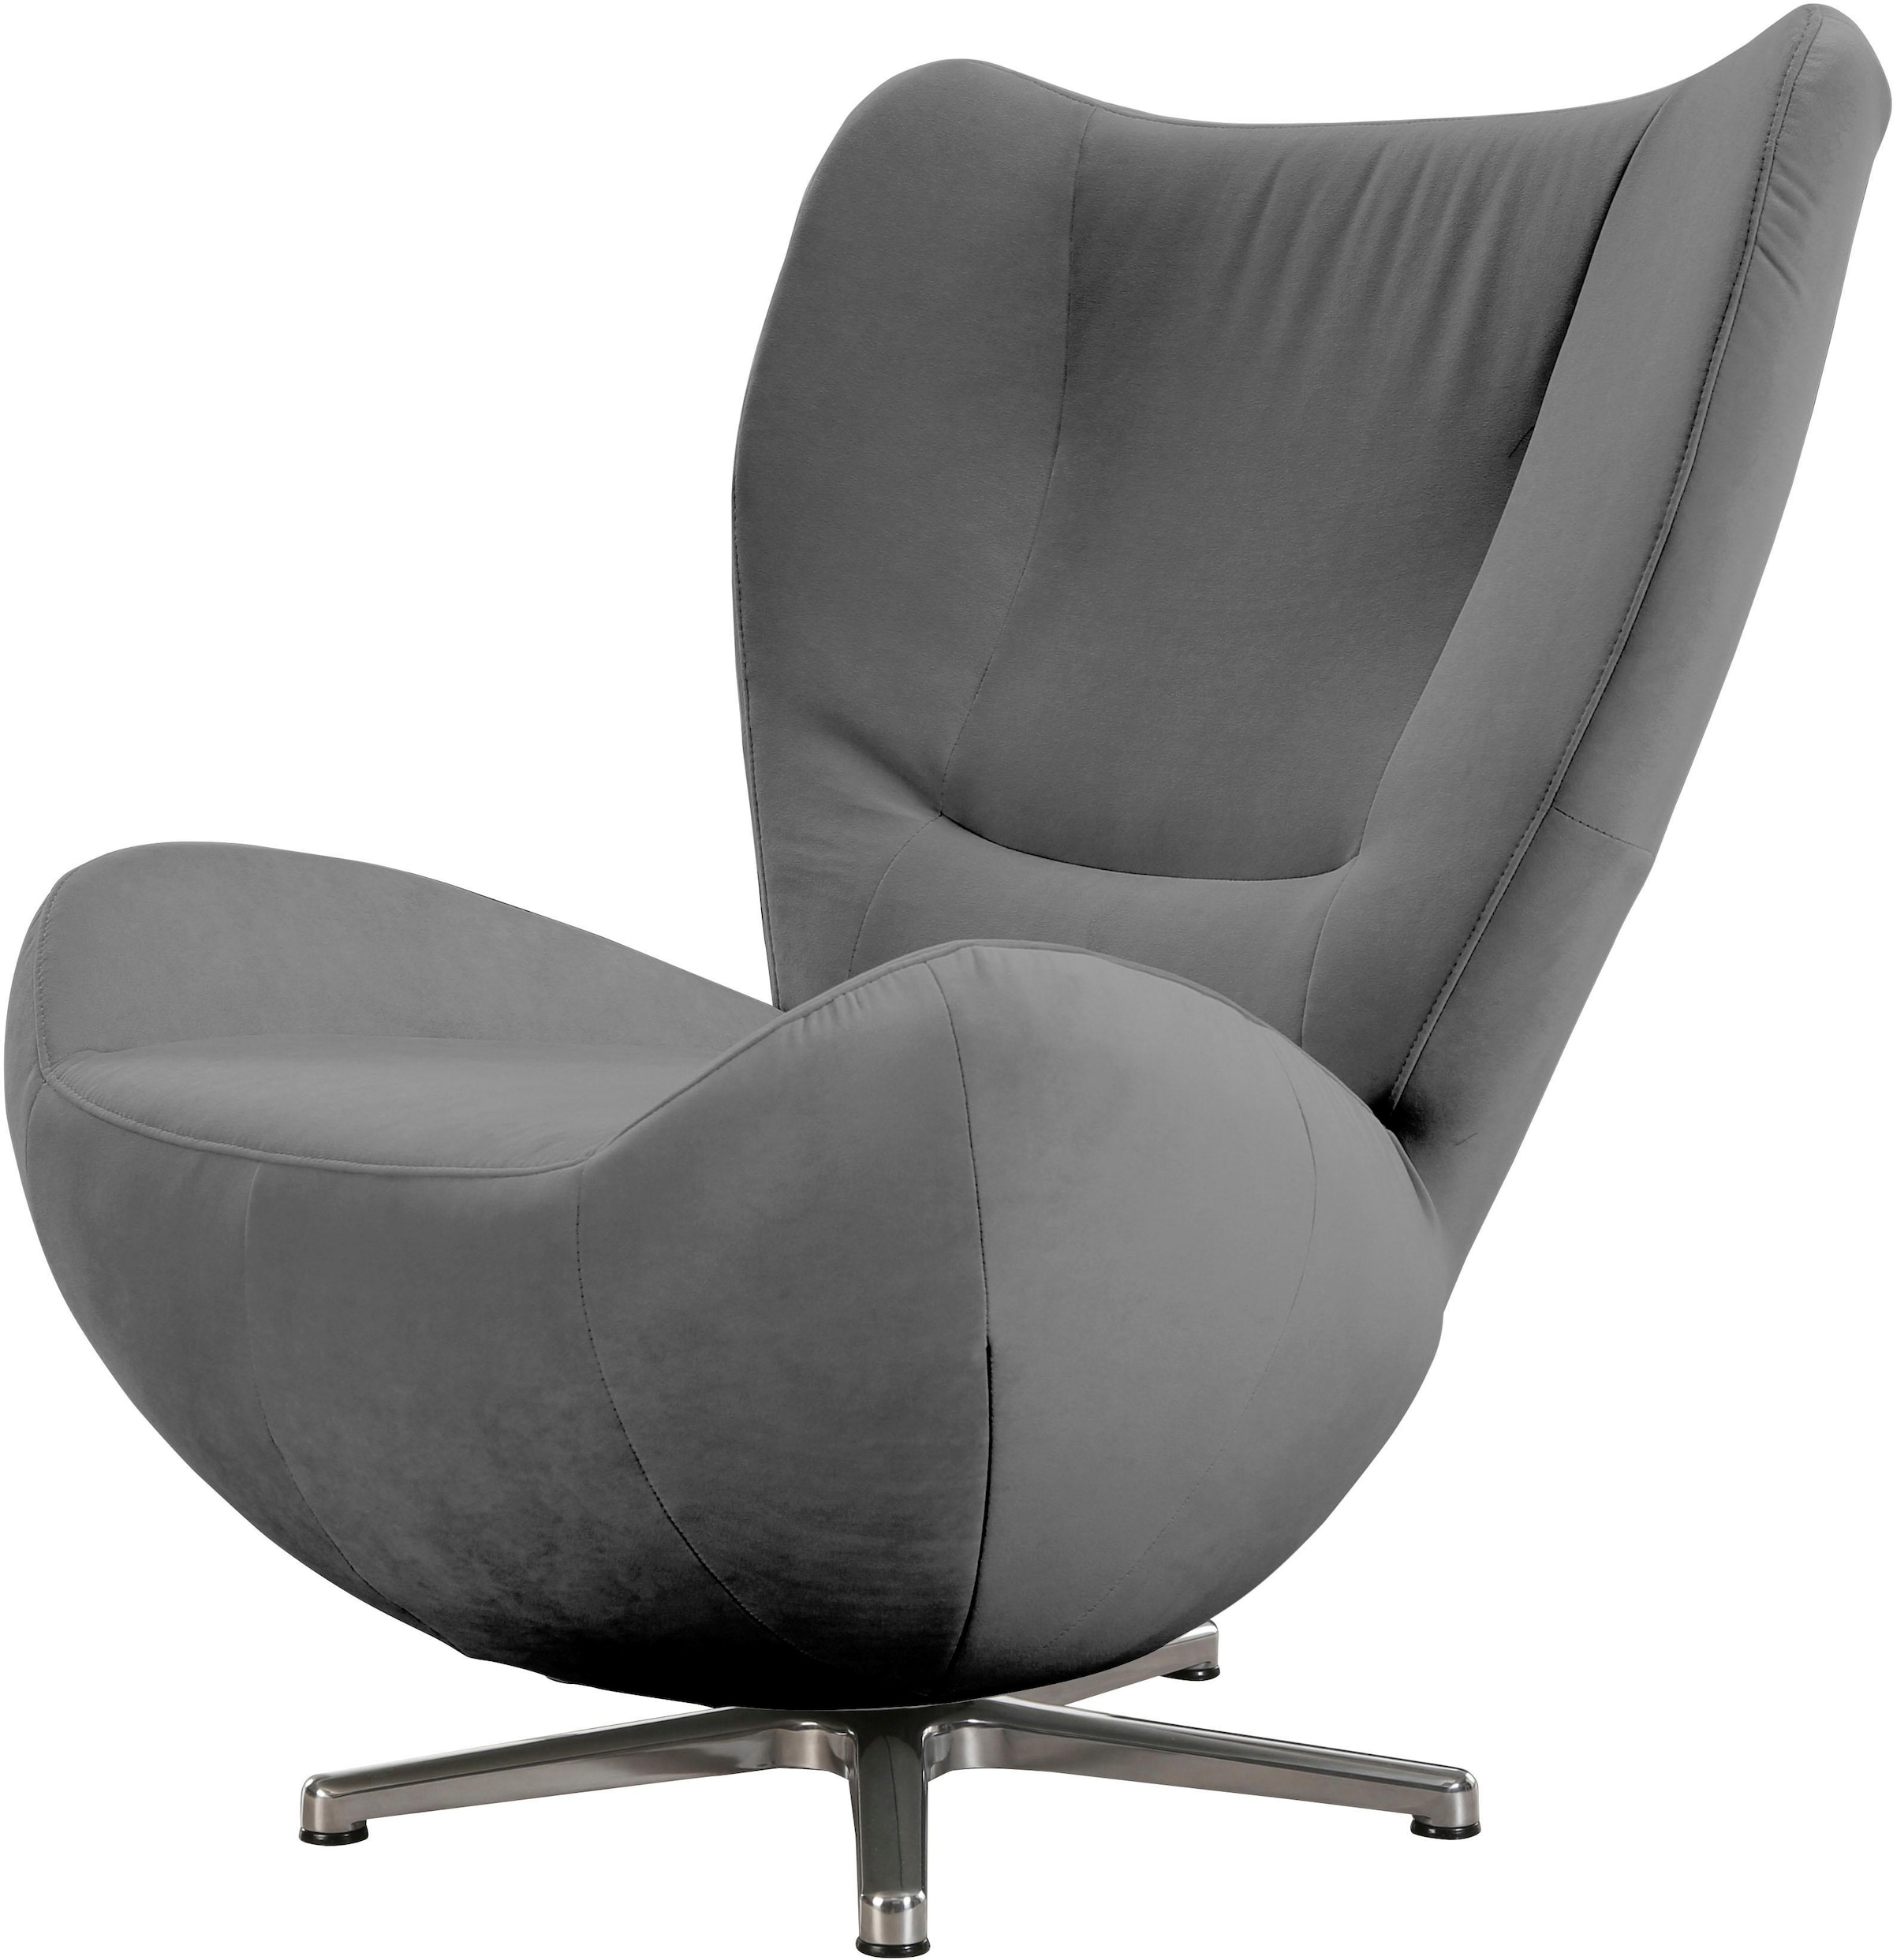 »TOM mit | Loungesessel HOME BAUR Chrom PURE«, Metall-Drehfuß TOM TAILOR in